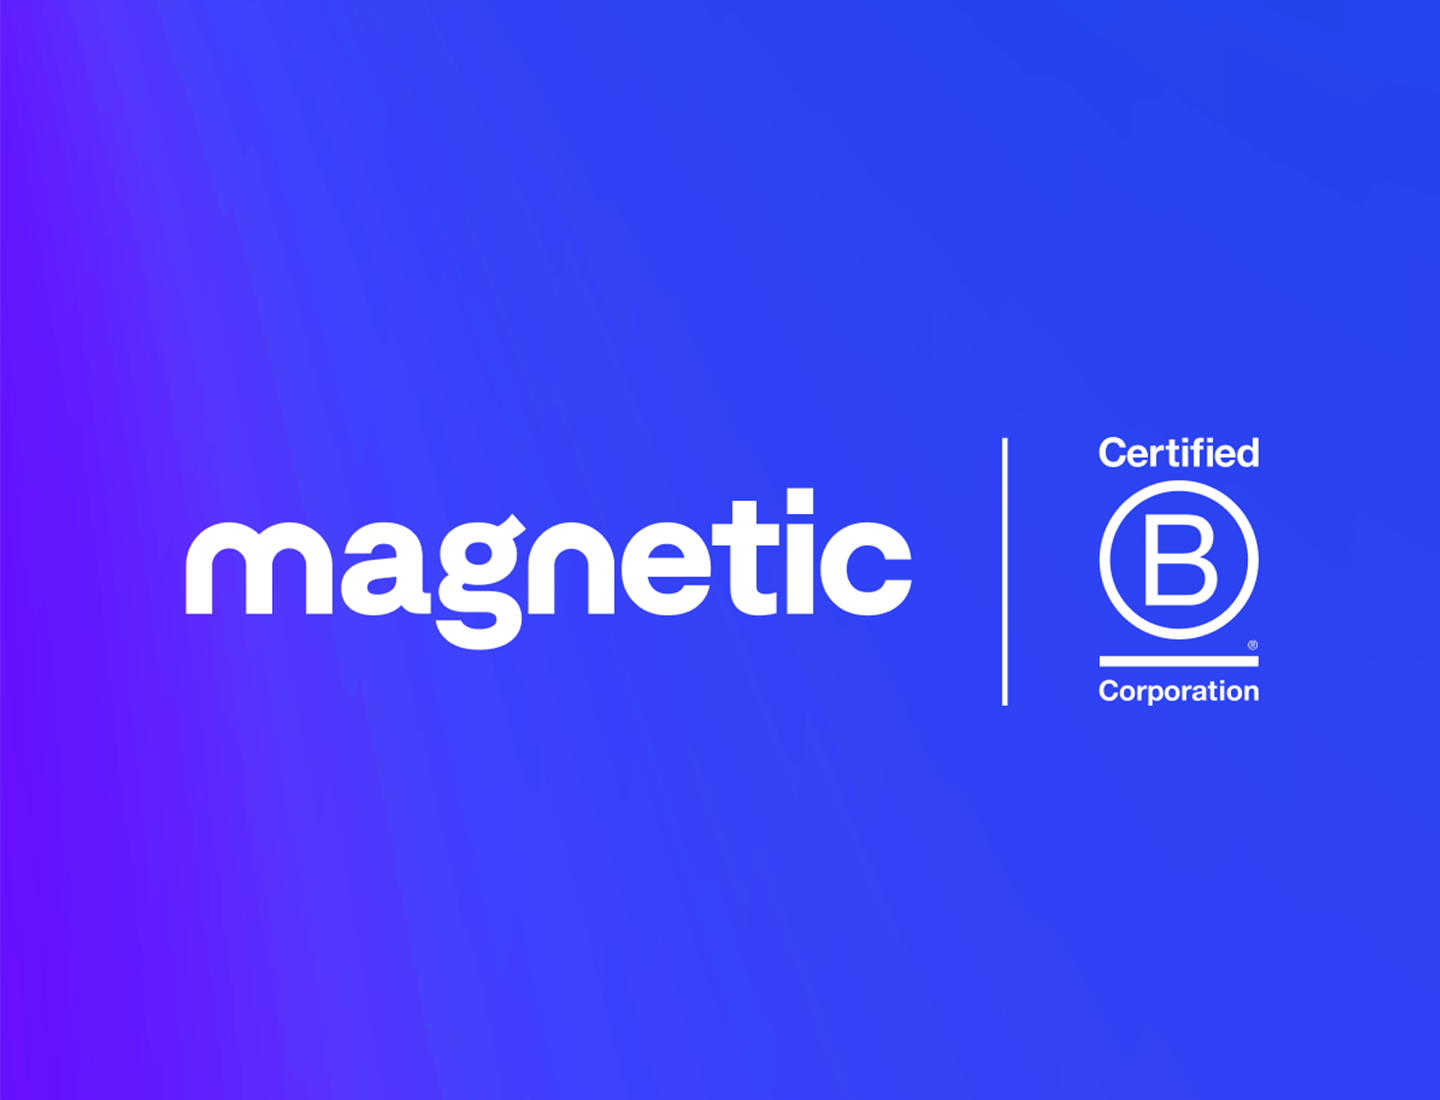 Press Release: Magnetic becomes B Corp